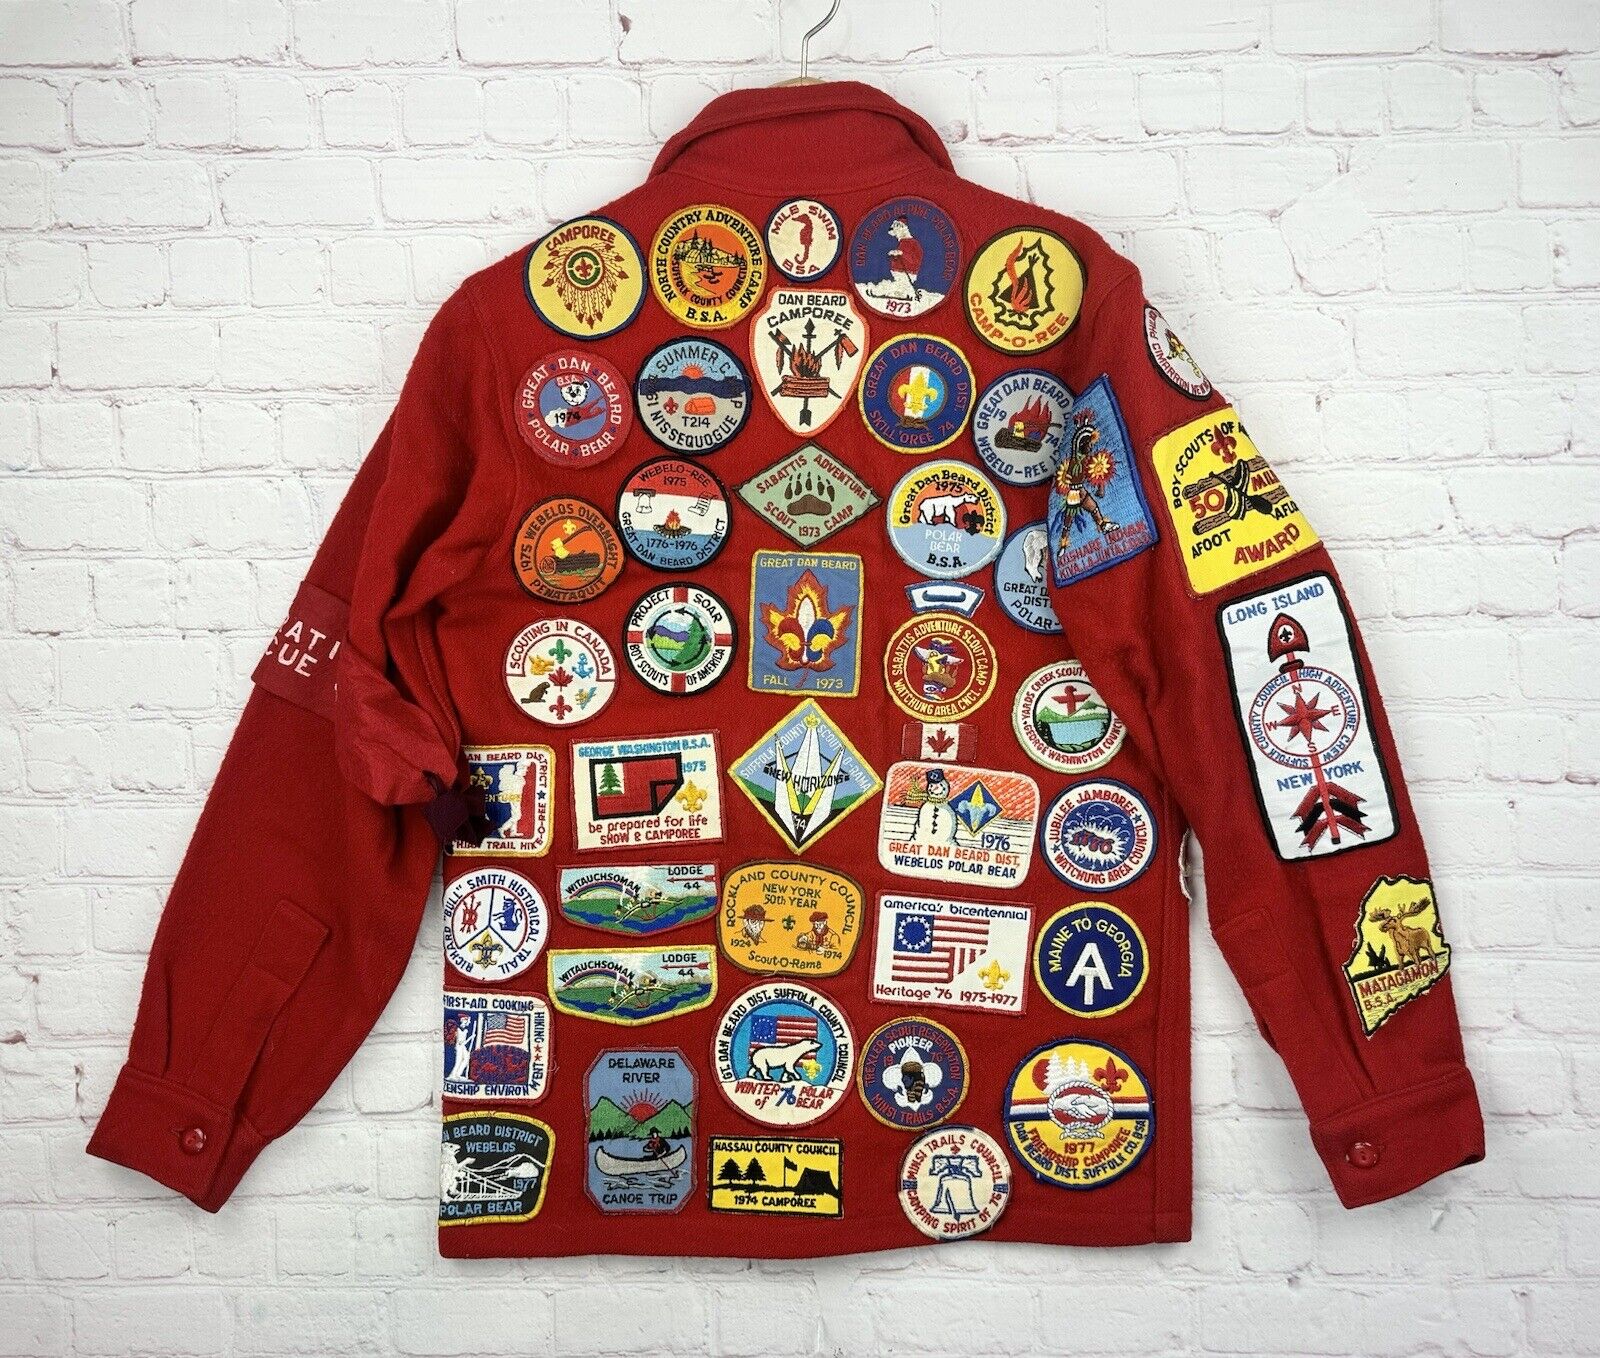 Vintage 1970s Boy Scout of America Red Wool Coat Official Jacket. W/ 60 Patches.